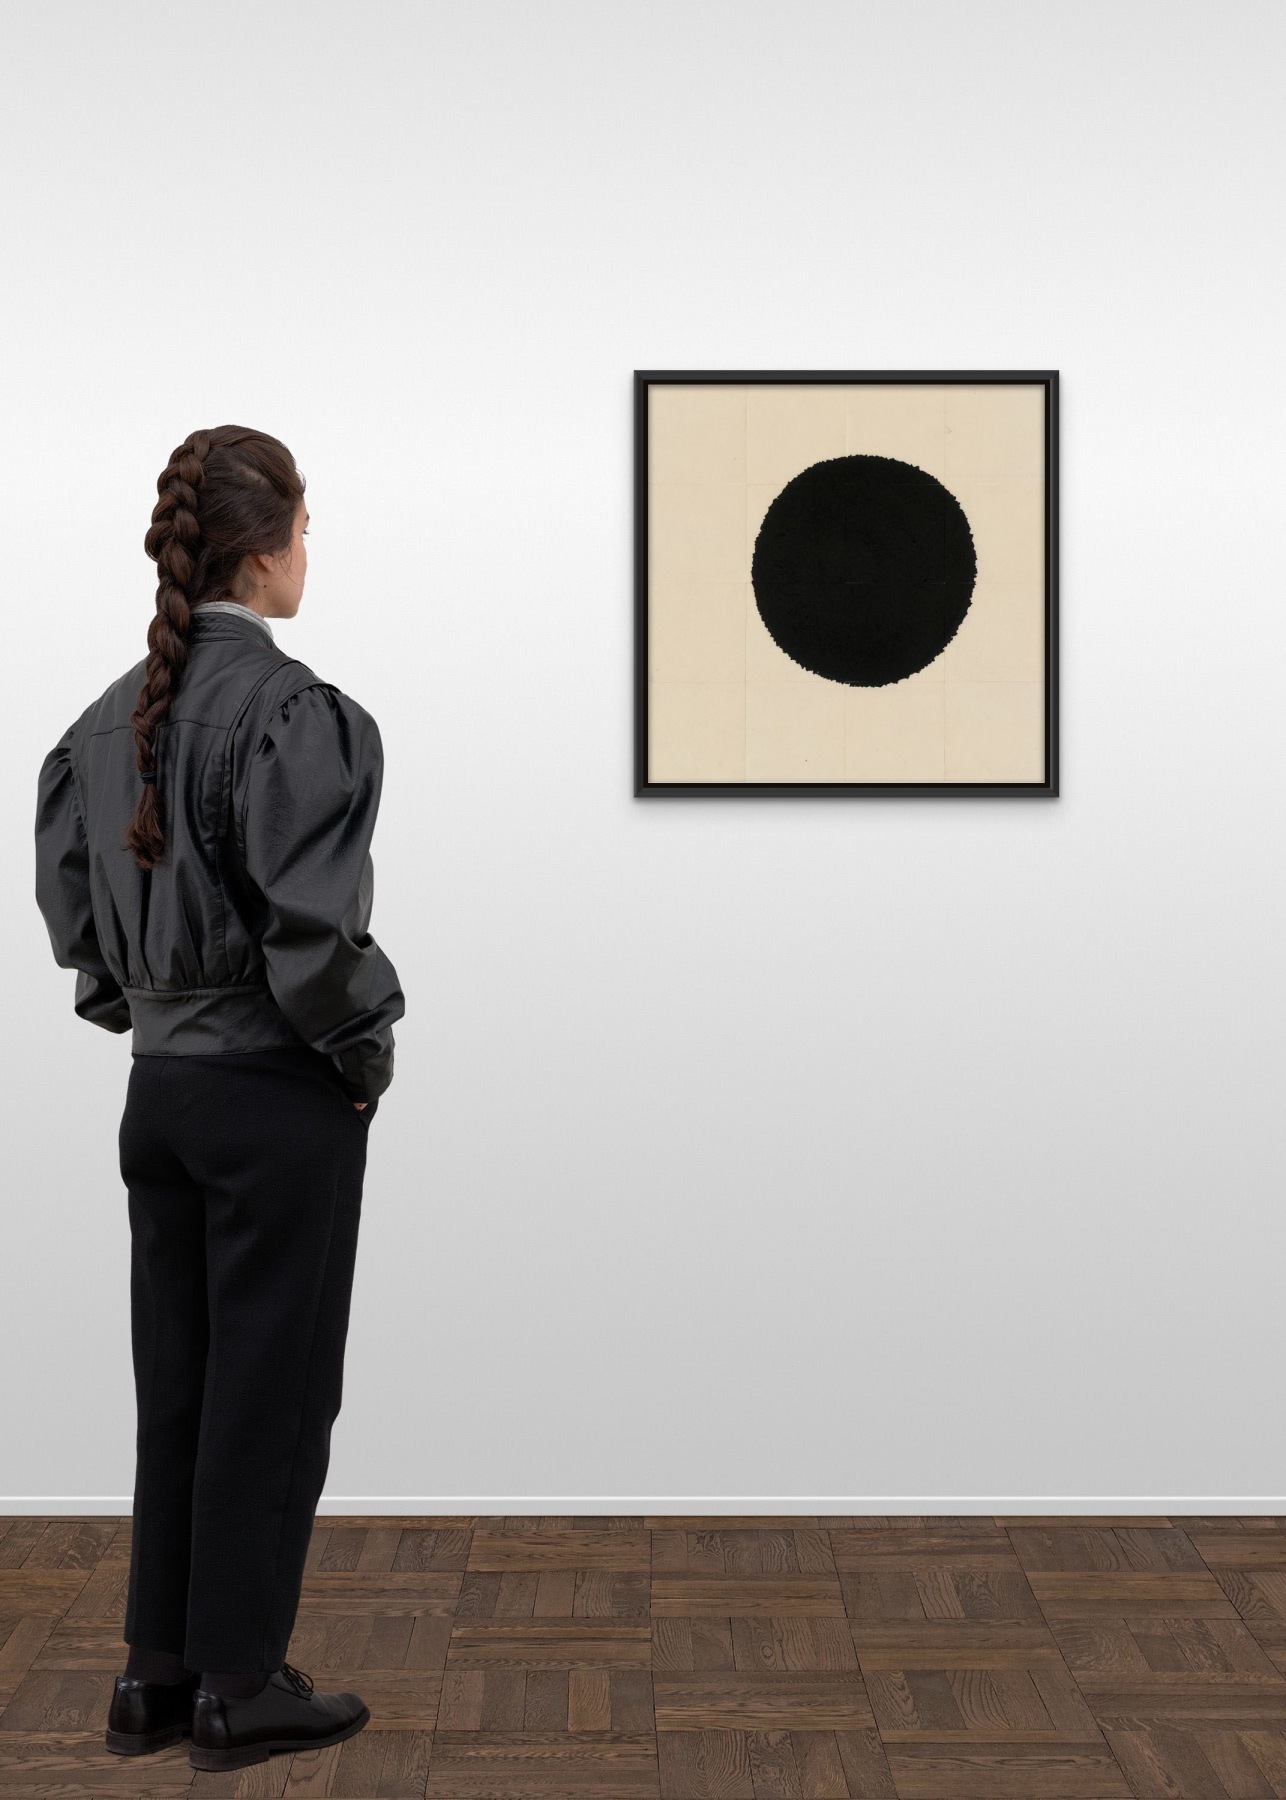 Invisible Questions That Fill the Air: James Lee Byars and Seung-Taek Lee